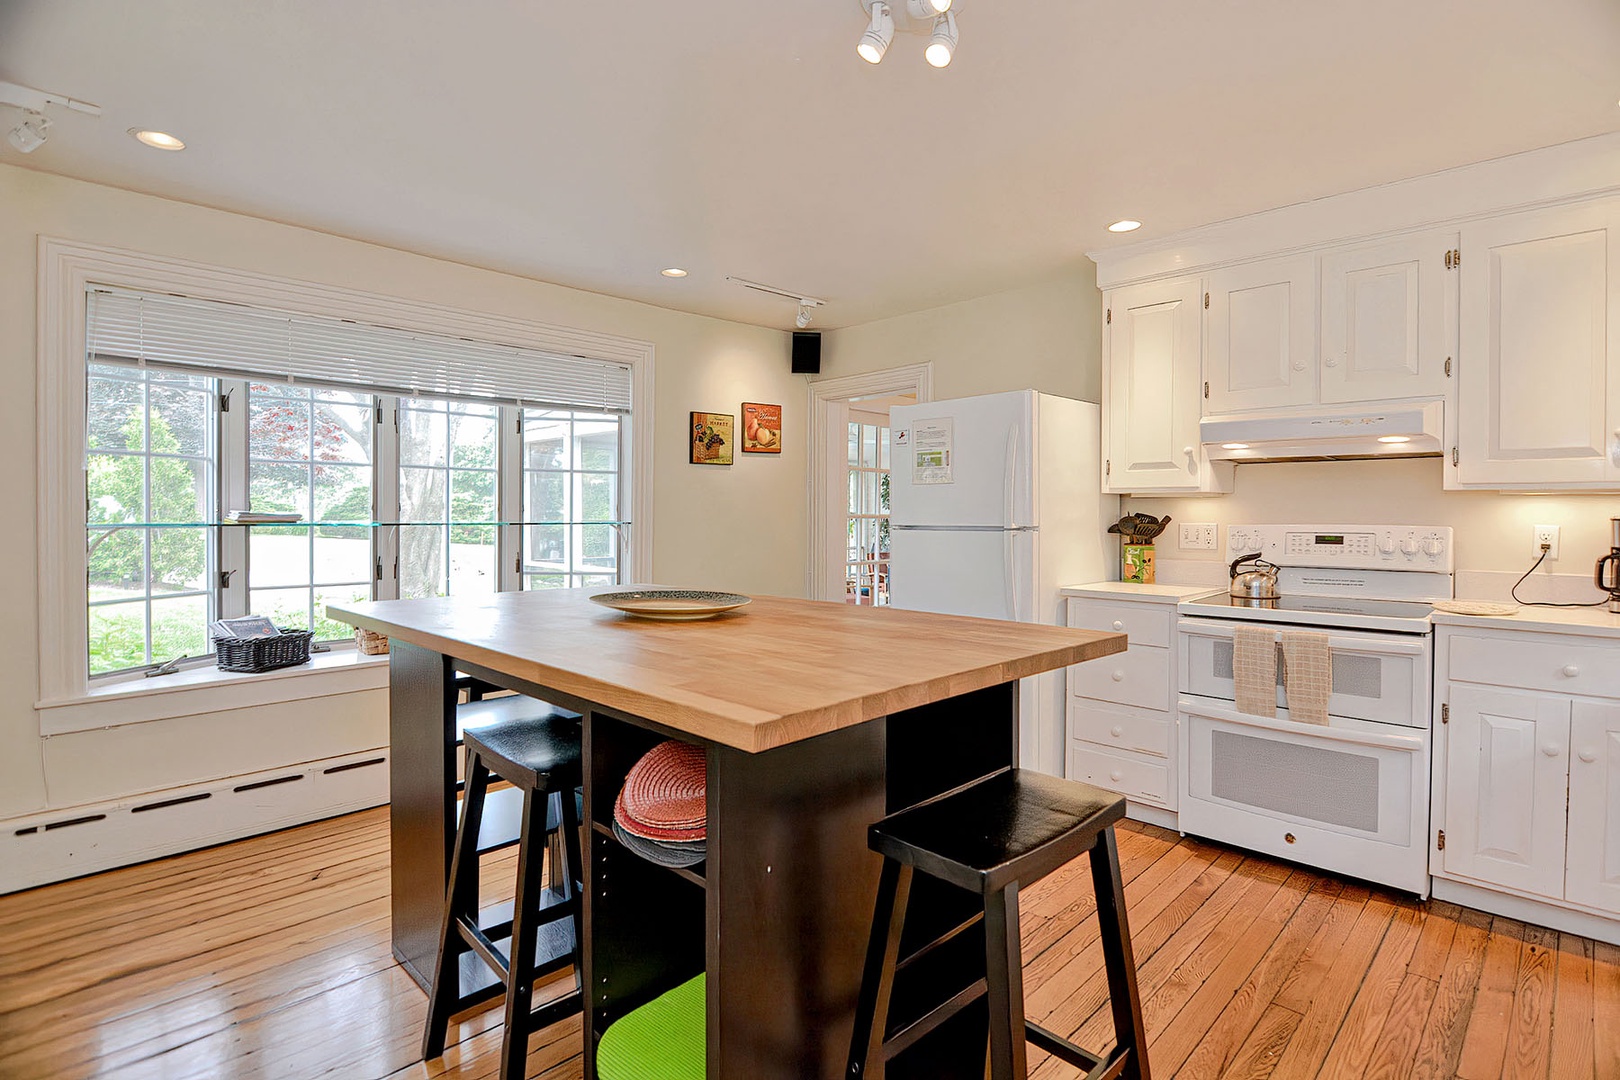 Eat-in kitchen with island seating.